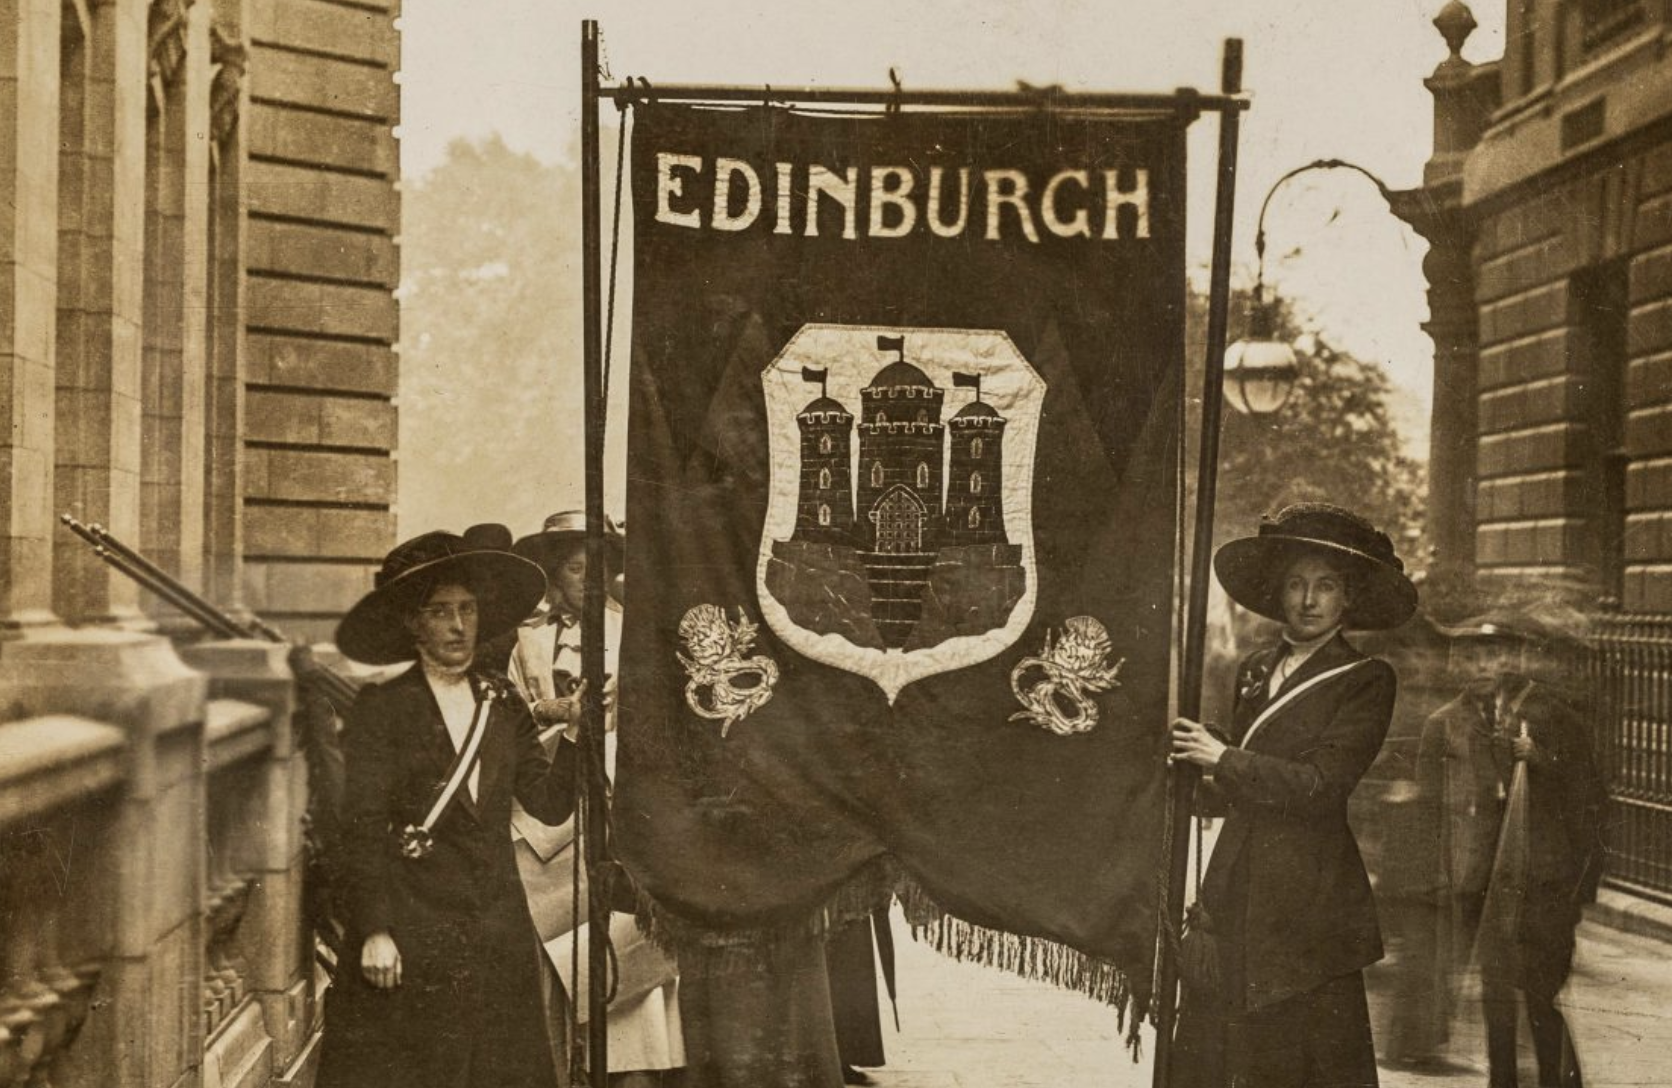 Mary Lowndes and Suffragette banners